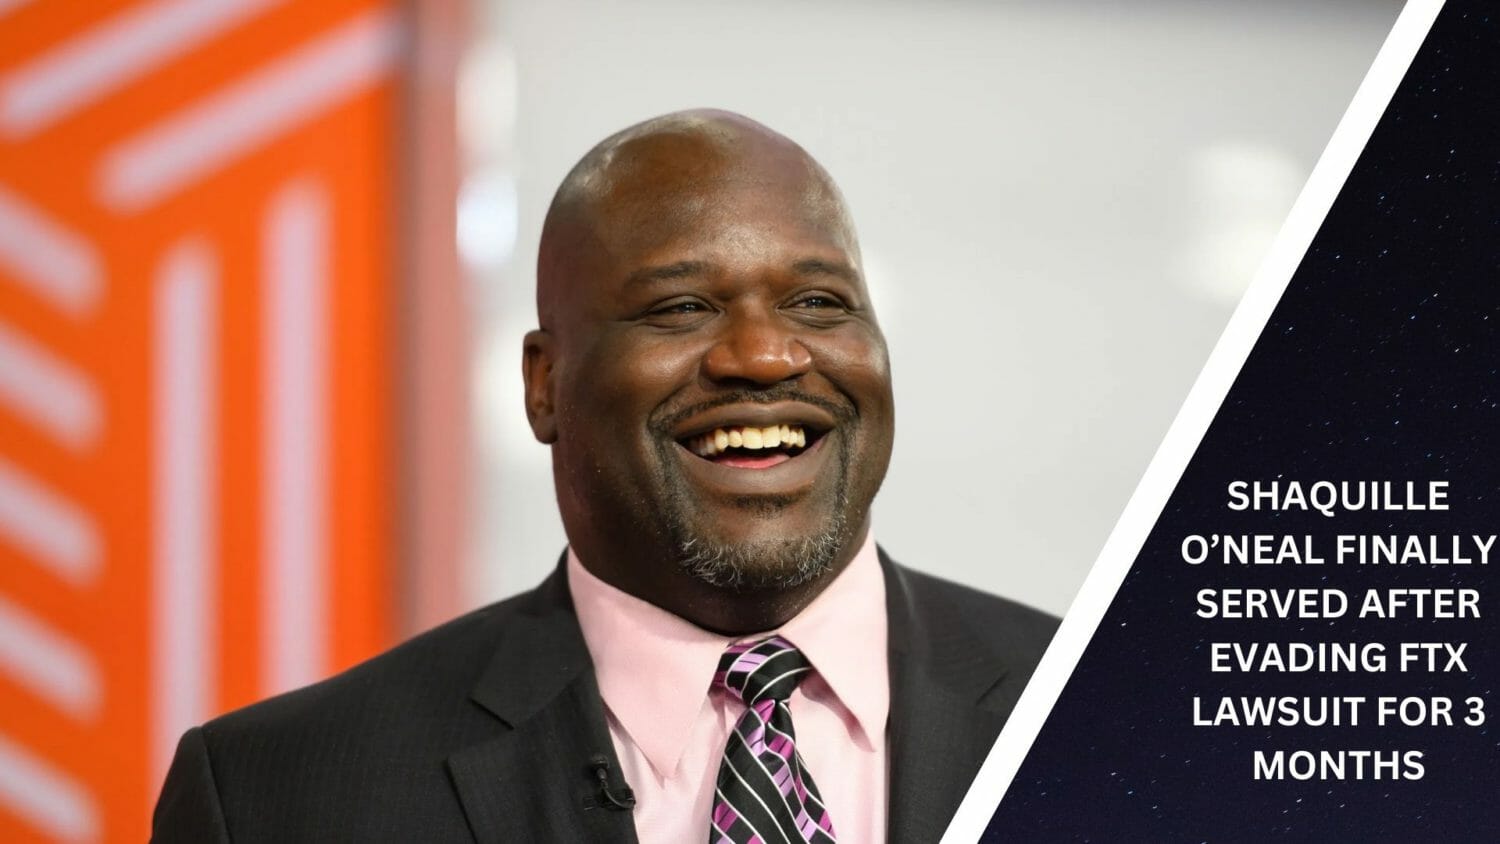 Shaquille O’neal Finally Served After Evading Ftx Lawsuit For 3 Months